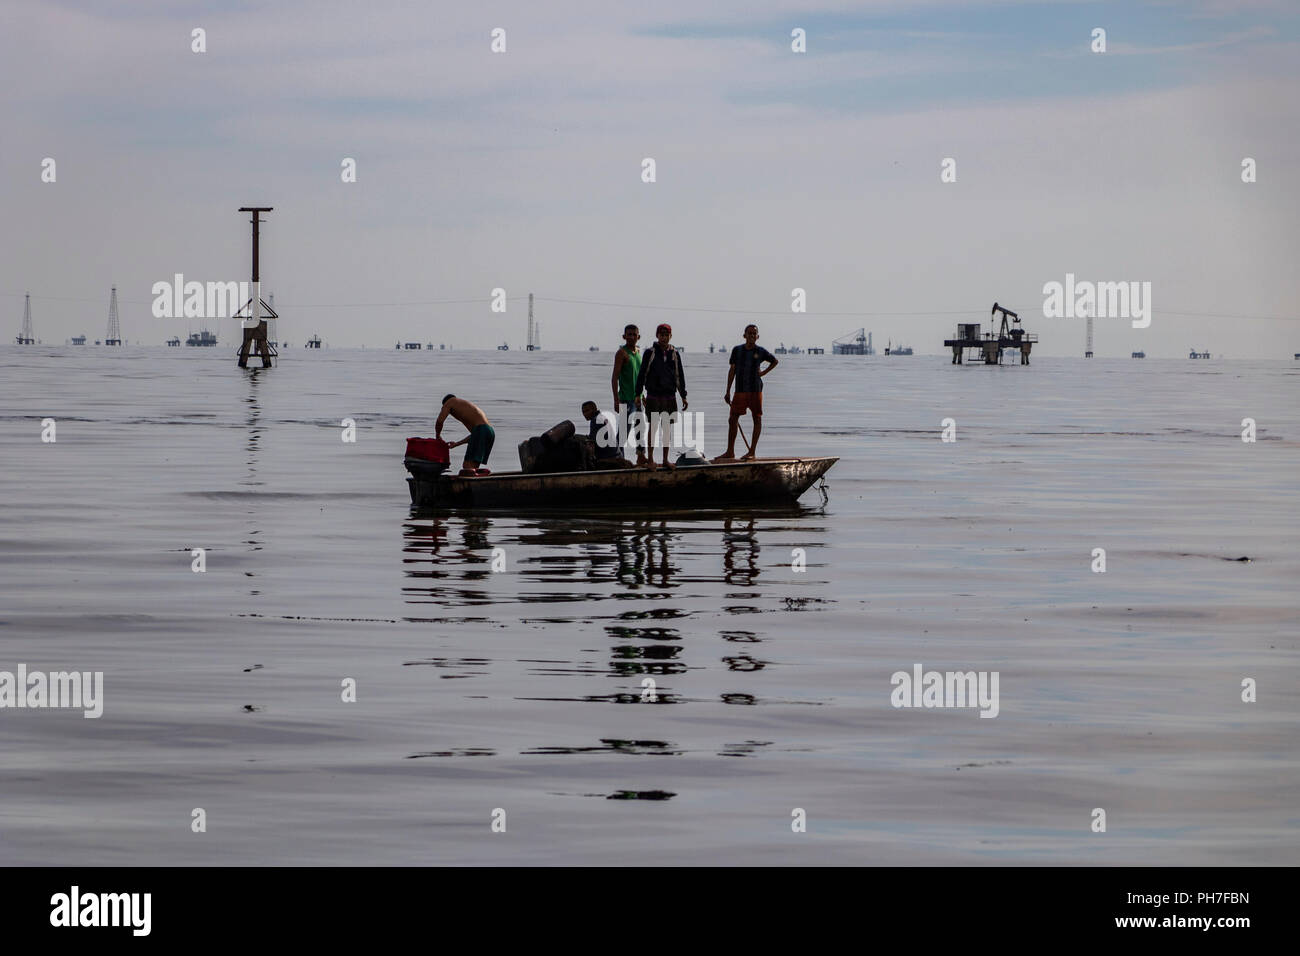 17 August 2018, Venezuela, Maracaibo: Young fishermen go by motorboat on Lake Maracaibo. In the oil-polluted lake they work as fishermen. Underneath the lake are large deposits from which the state-owned Venezuelan company PDVSA produces oil and gas. Oil pipelines are already leaking there. However, the pollution of the lake seems to have become chronic. There are hardly any official figures on this, given the situation, which is strictly controlled by the national regime. Venezuela - once the richest country in South America and blessed with the world's largest oil reserves - has been increas Stock Photo